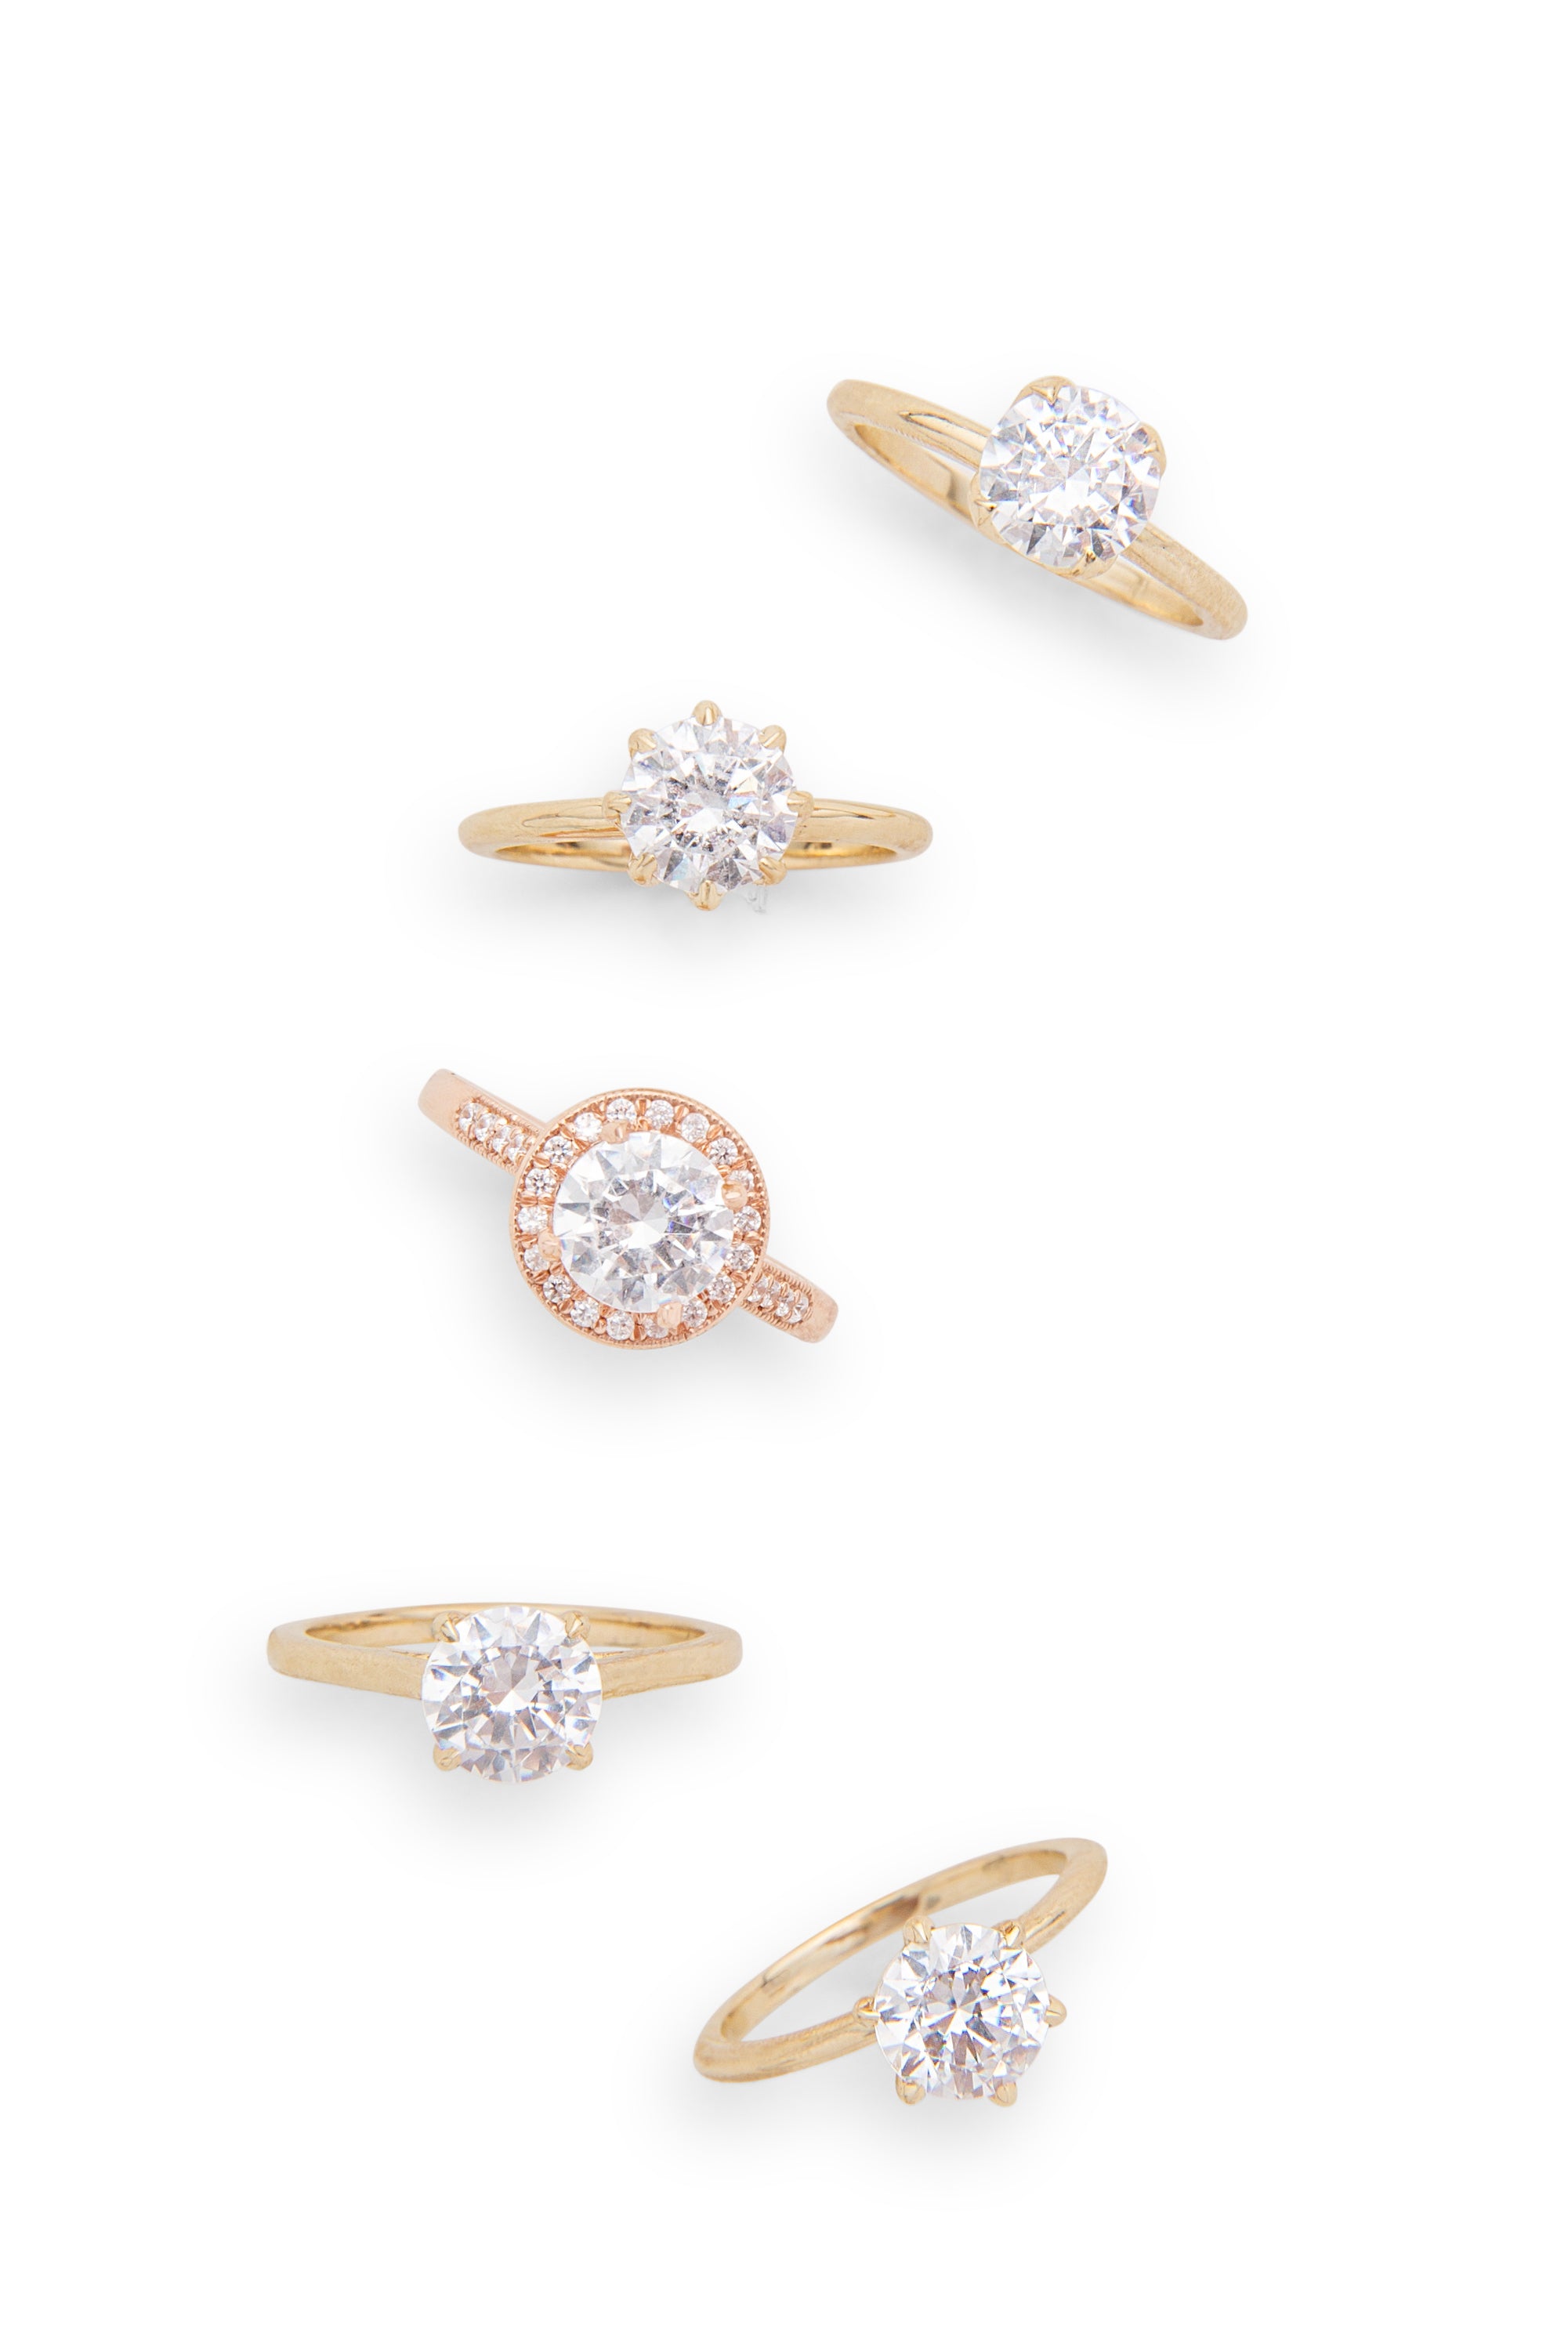 Shop Diamond Engagement Rings Online | Fame Diamonds | Vancouver | The  premier jewelry store in Vancouver, Canada for one-of-a-kind engagement  rings